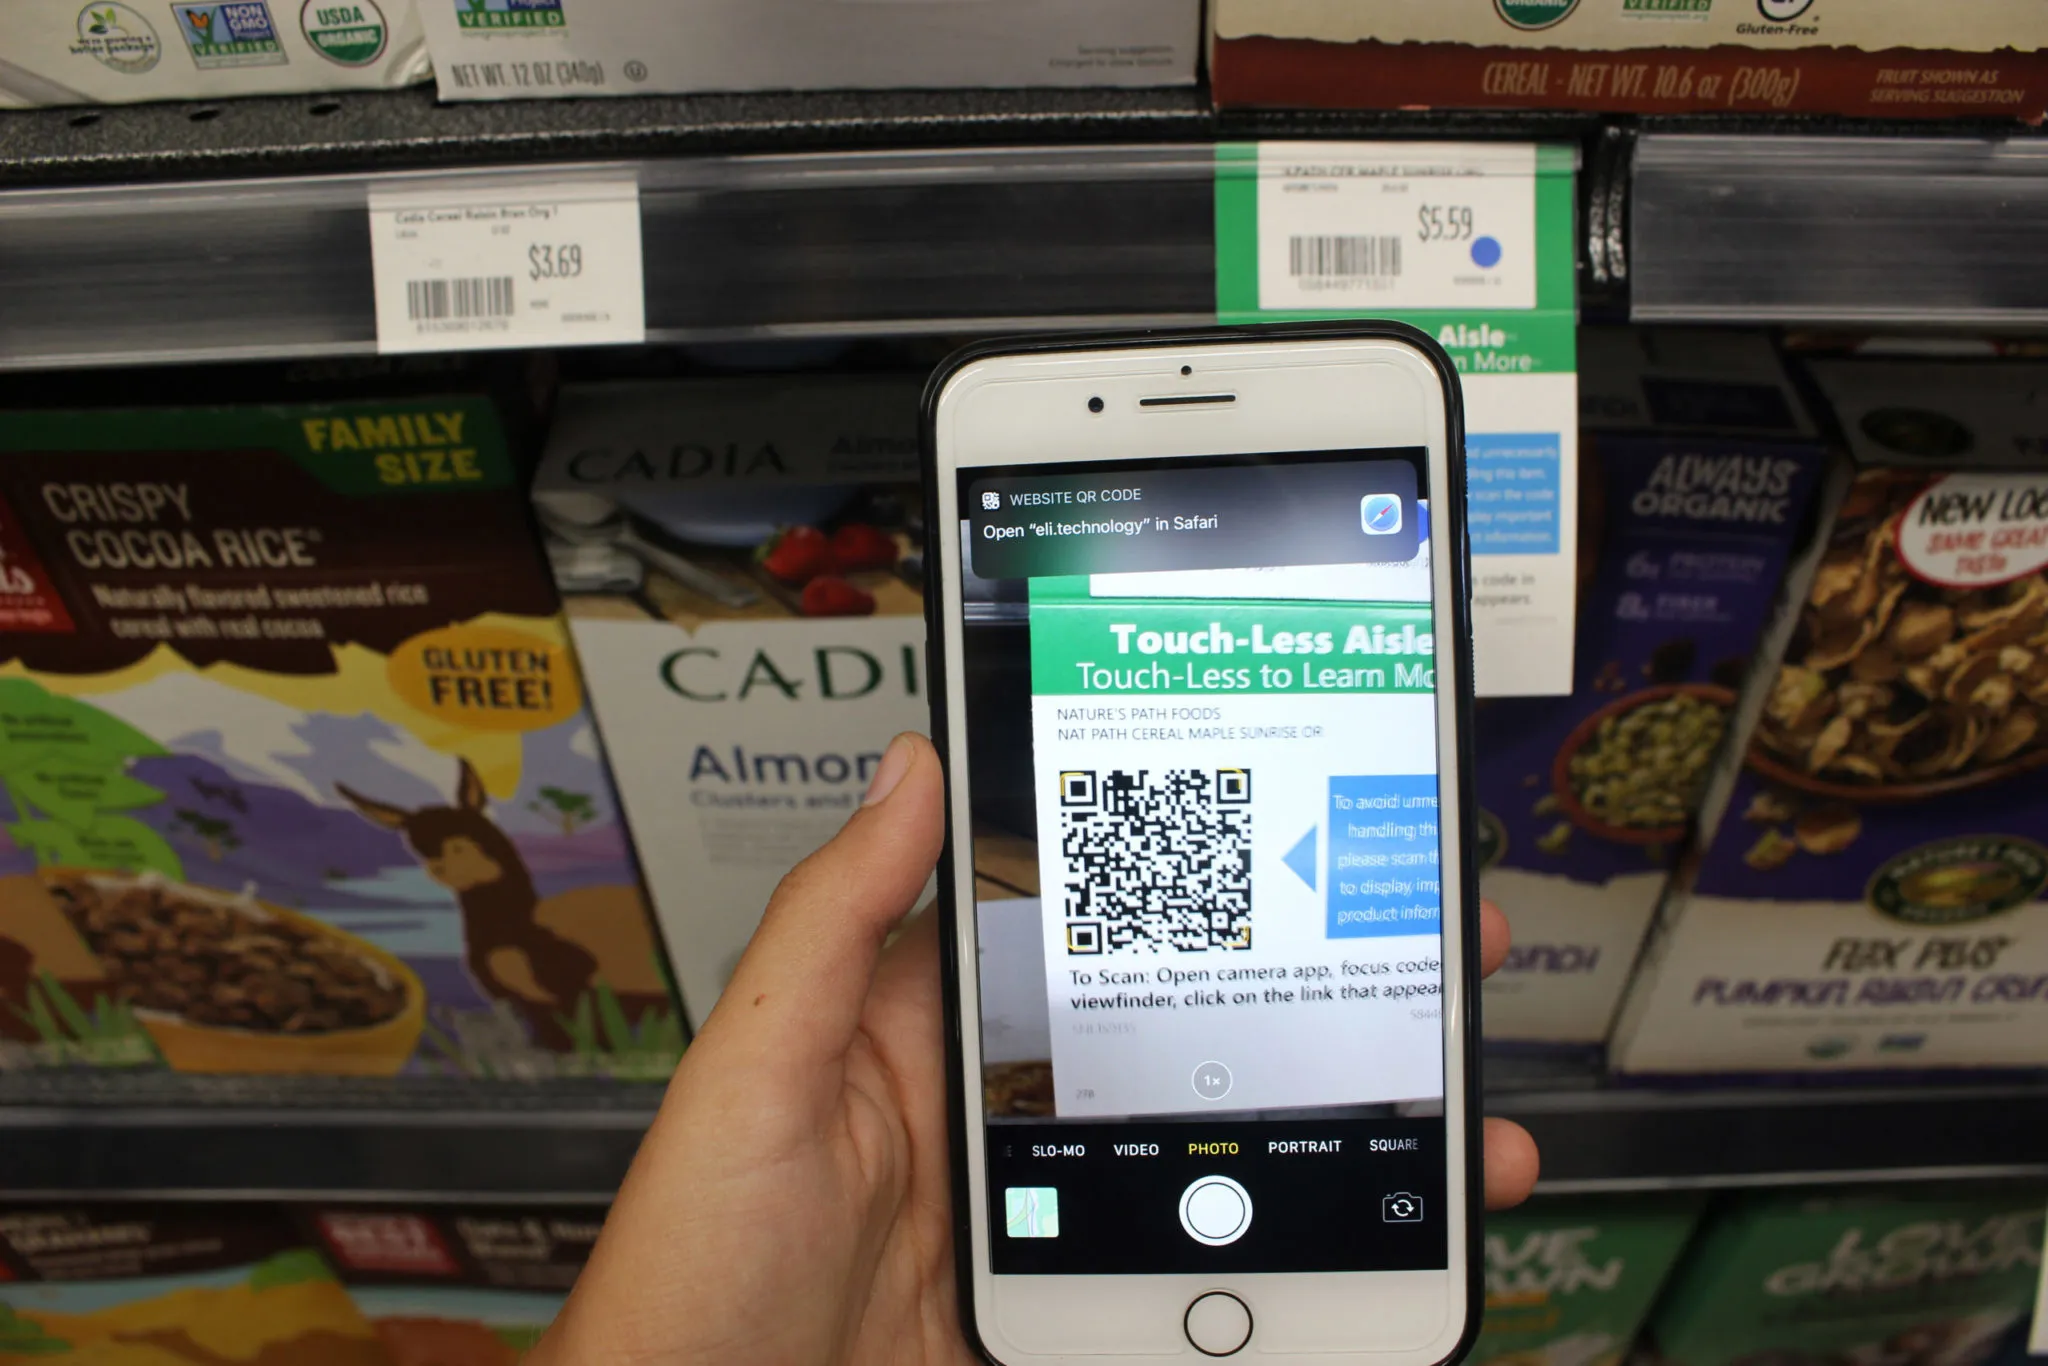 Tampa-based Cornerstone Consulting offers smart shelf tags, QR codes with digita..